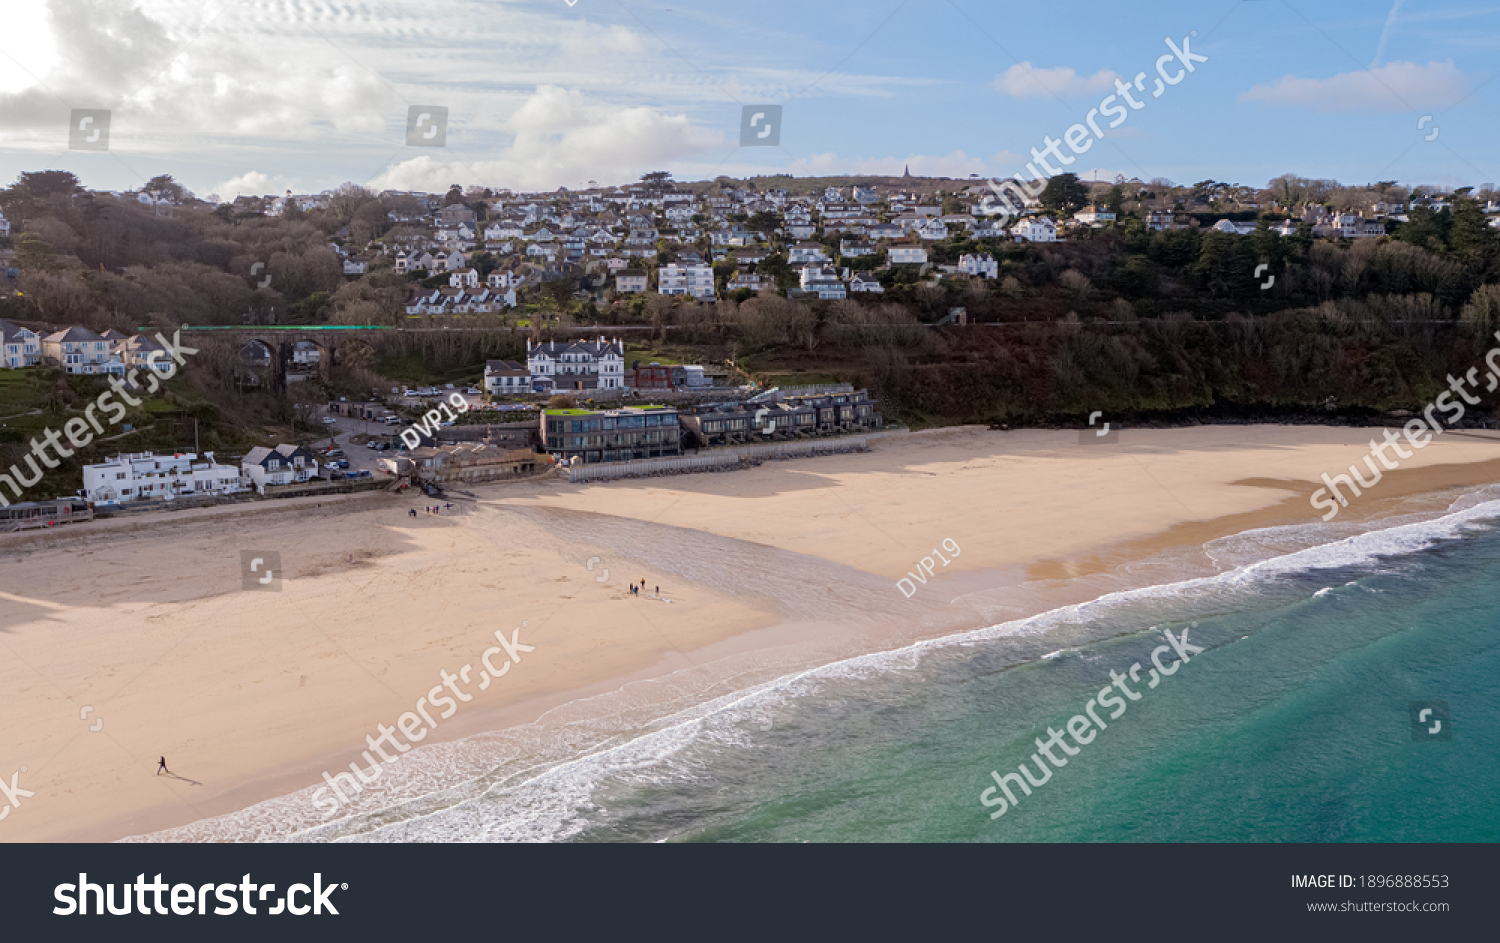 Carbis Bay in Cornwall where the G7 Summit will be taking place in June #1896888553